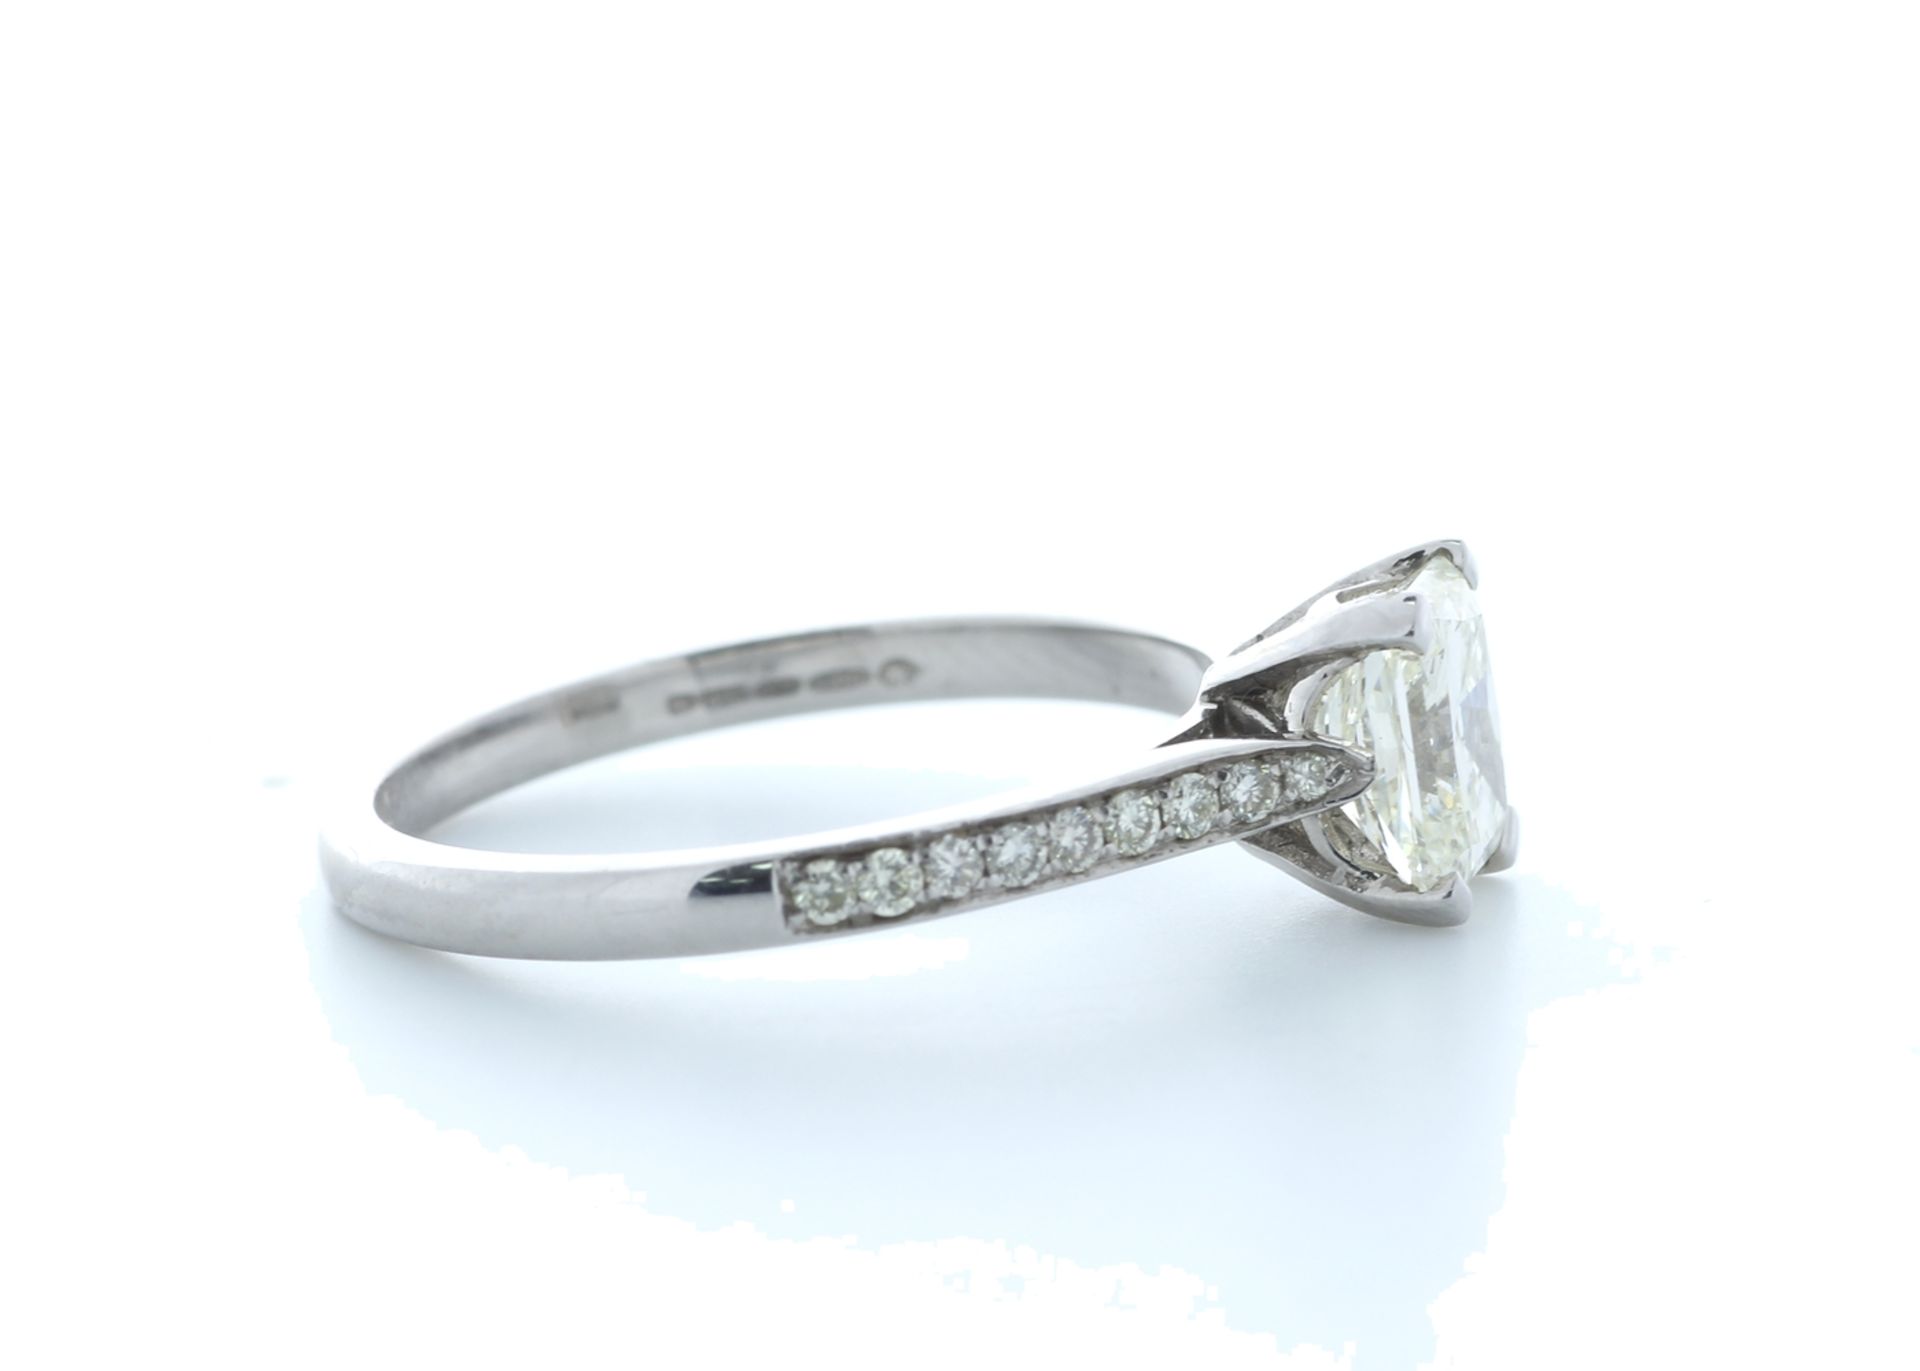 18ct White Gold Radiant Cut Diamond Ring 1.36 (1.19) Carats - Image 4 of 5